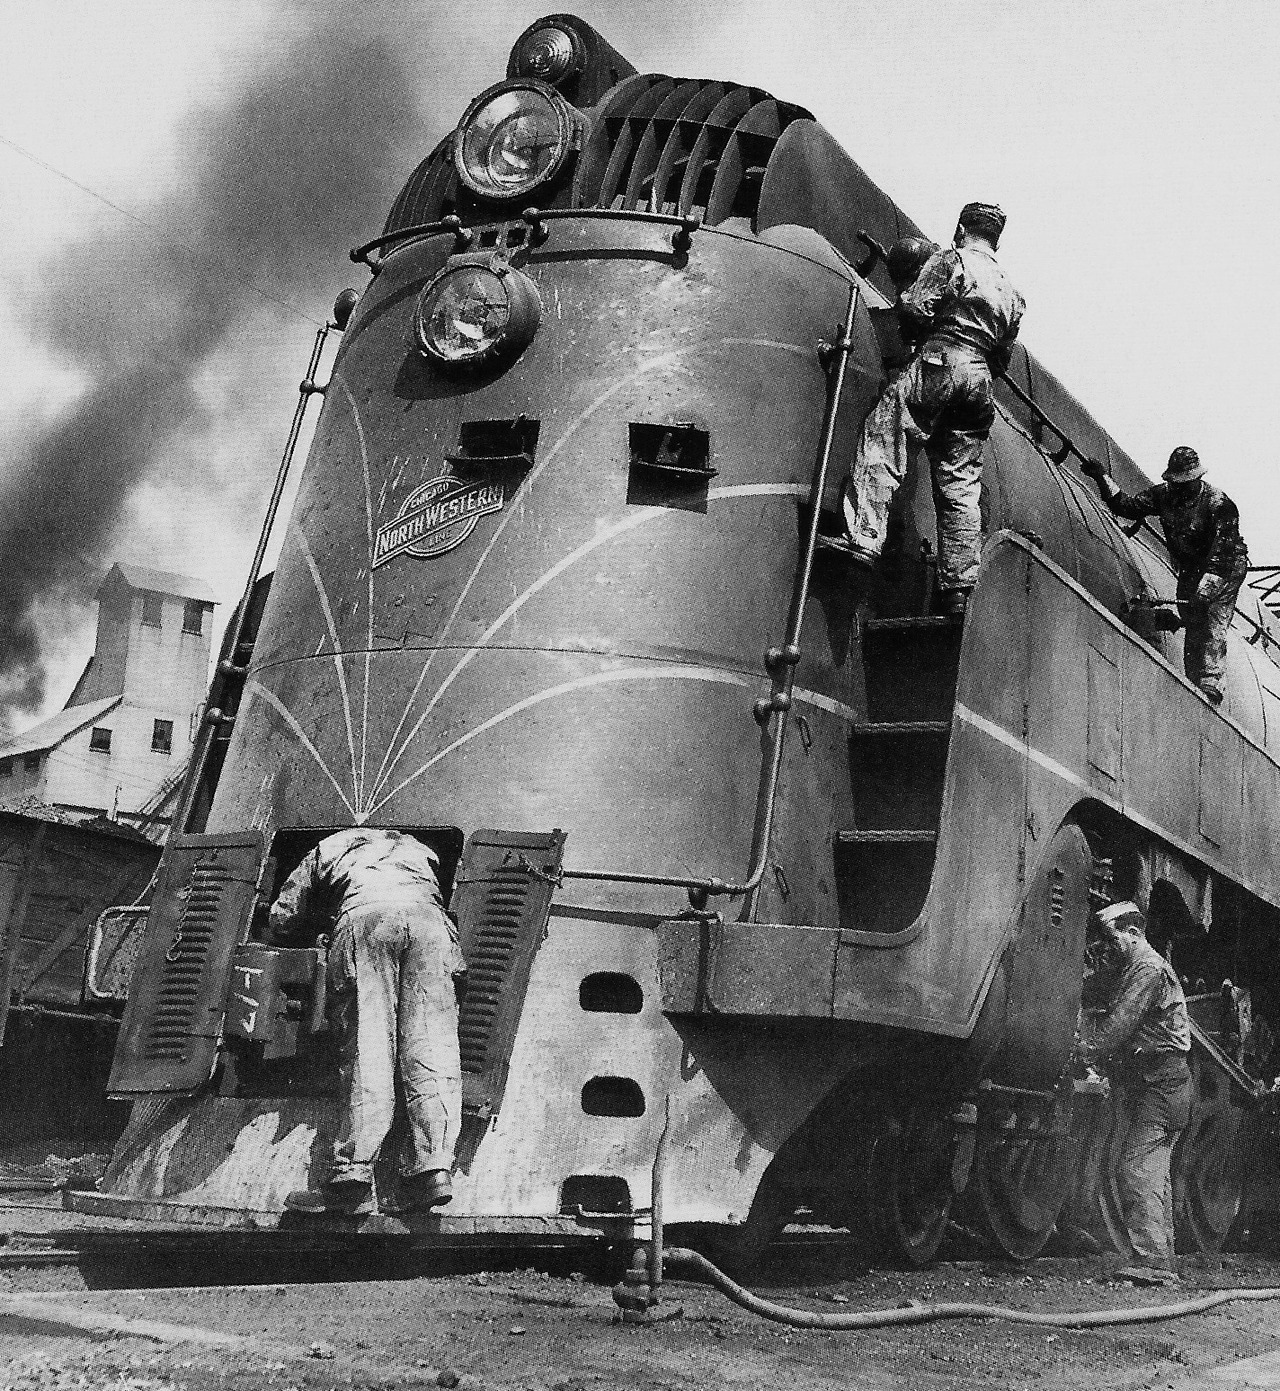 Soldiers working on a train, Chicago, 1945